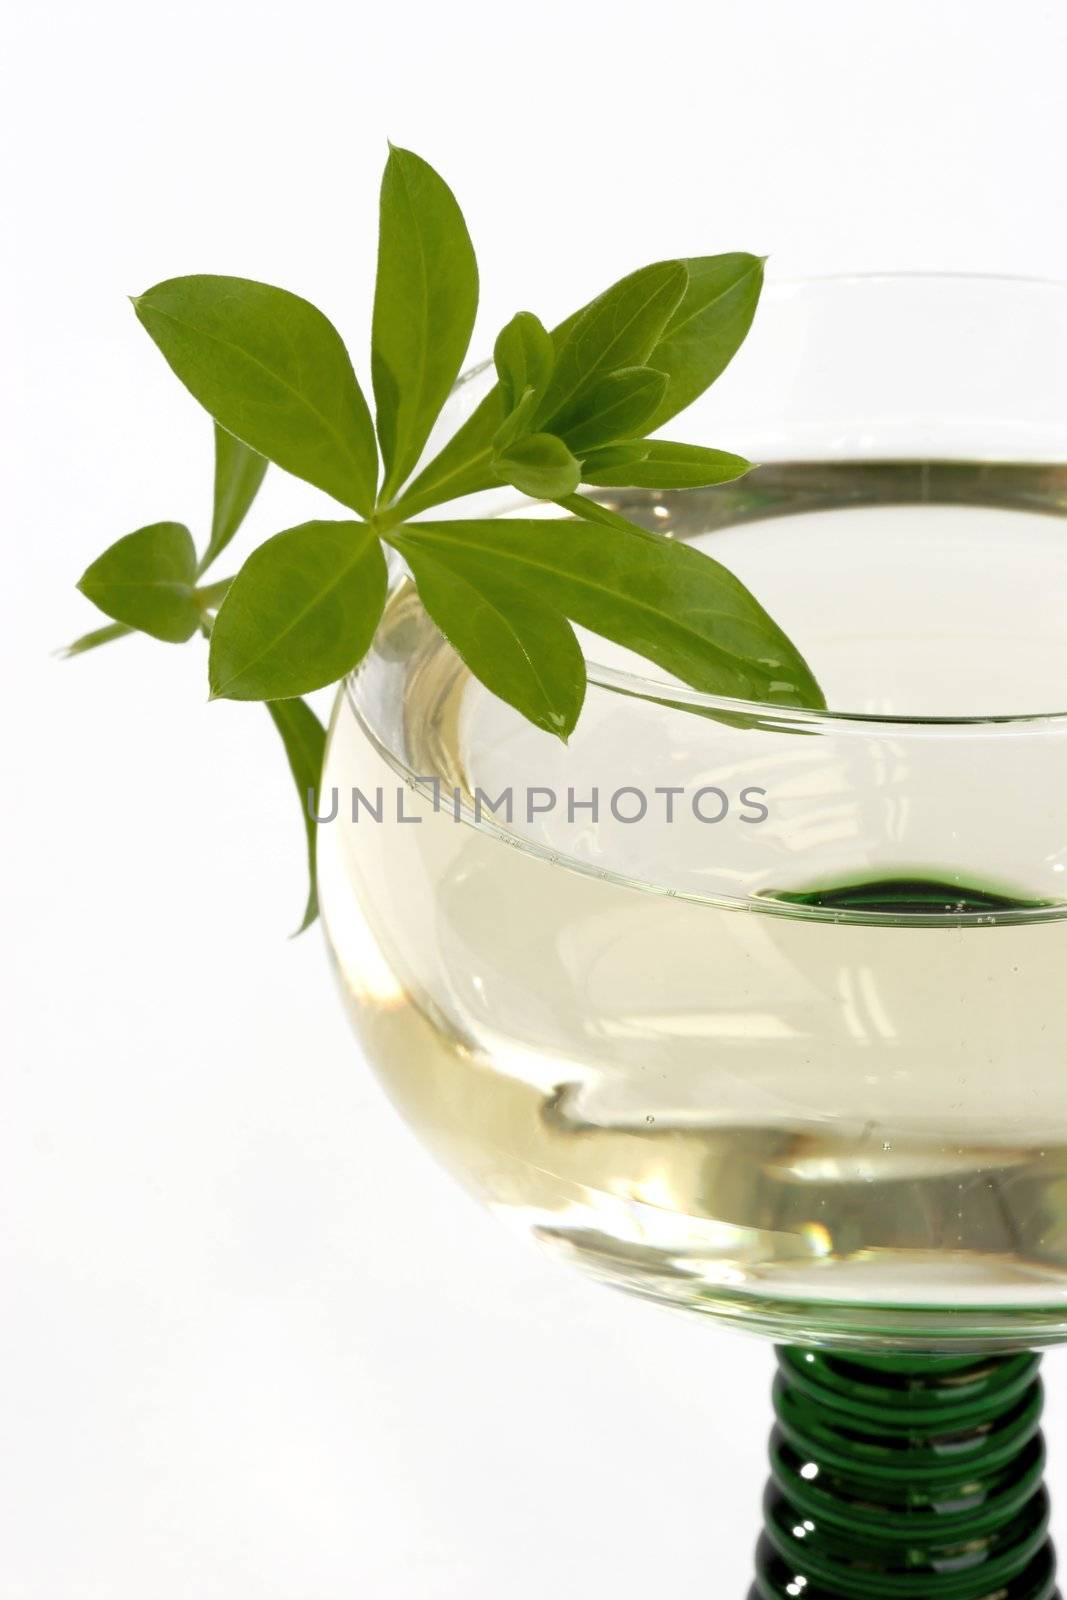 Close up of woodruff wine in a glass on bright background